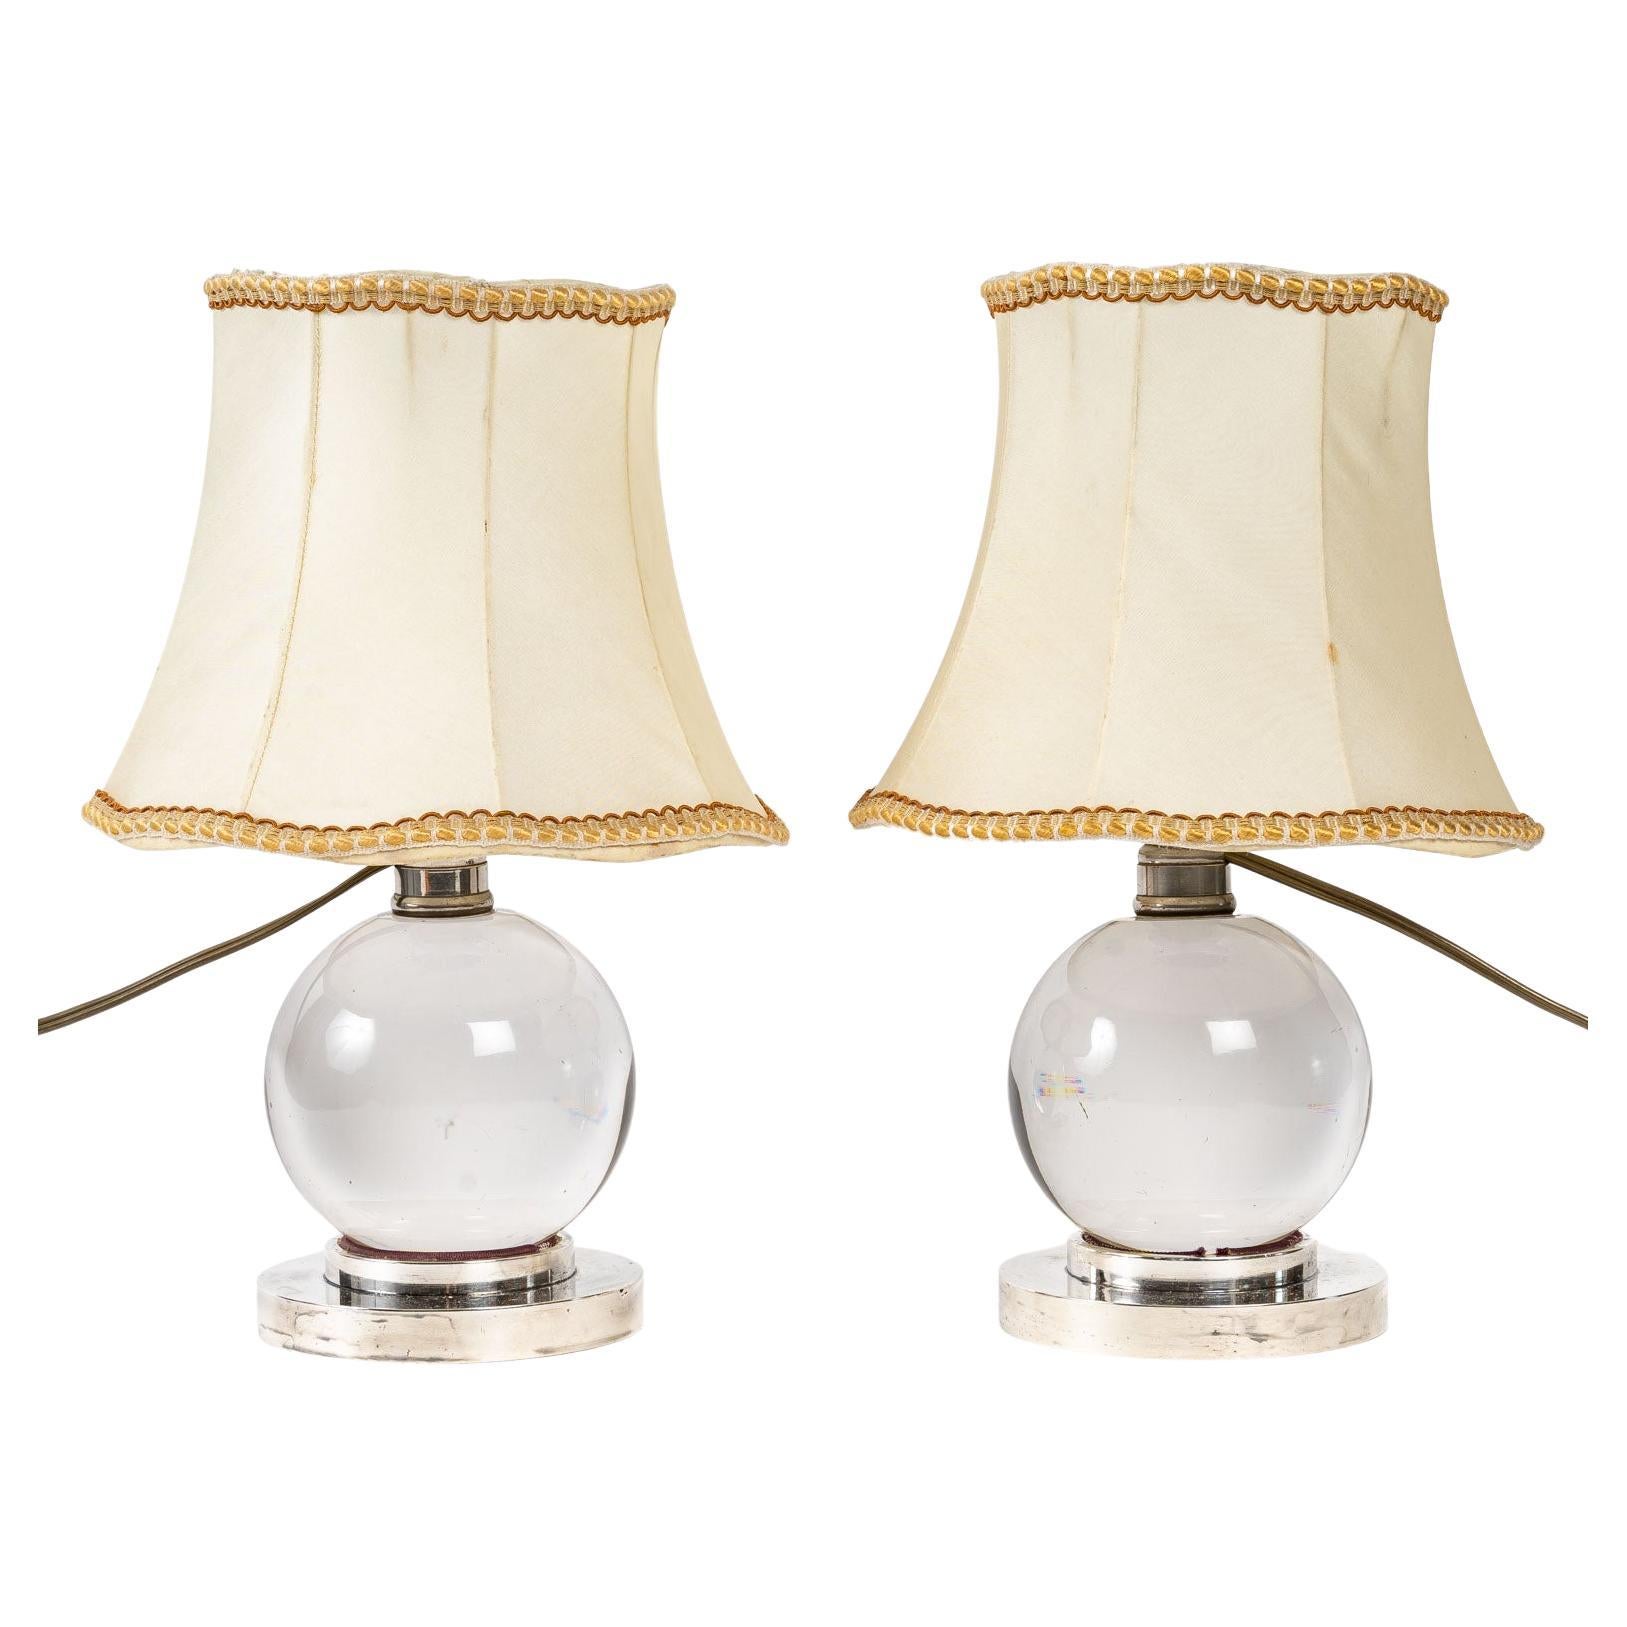 Pair of crystal lamps by Jaques ADNET 1940